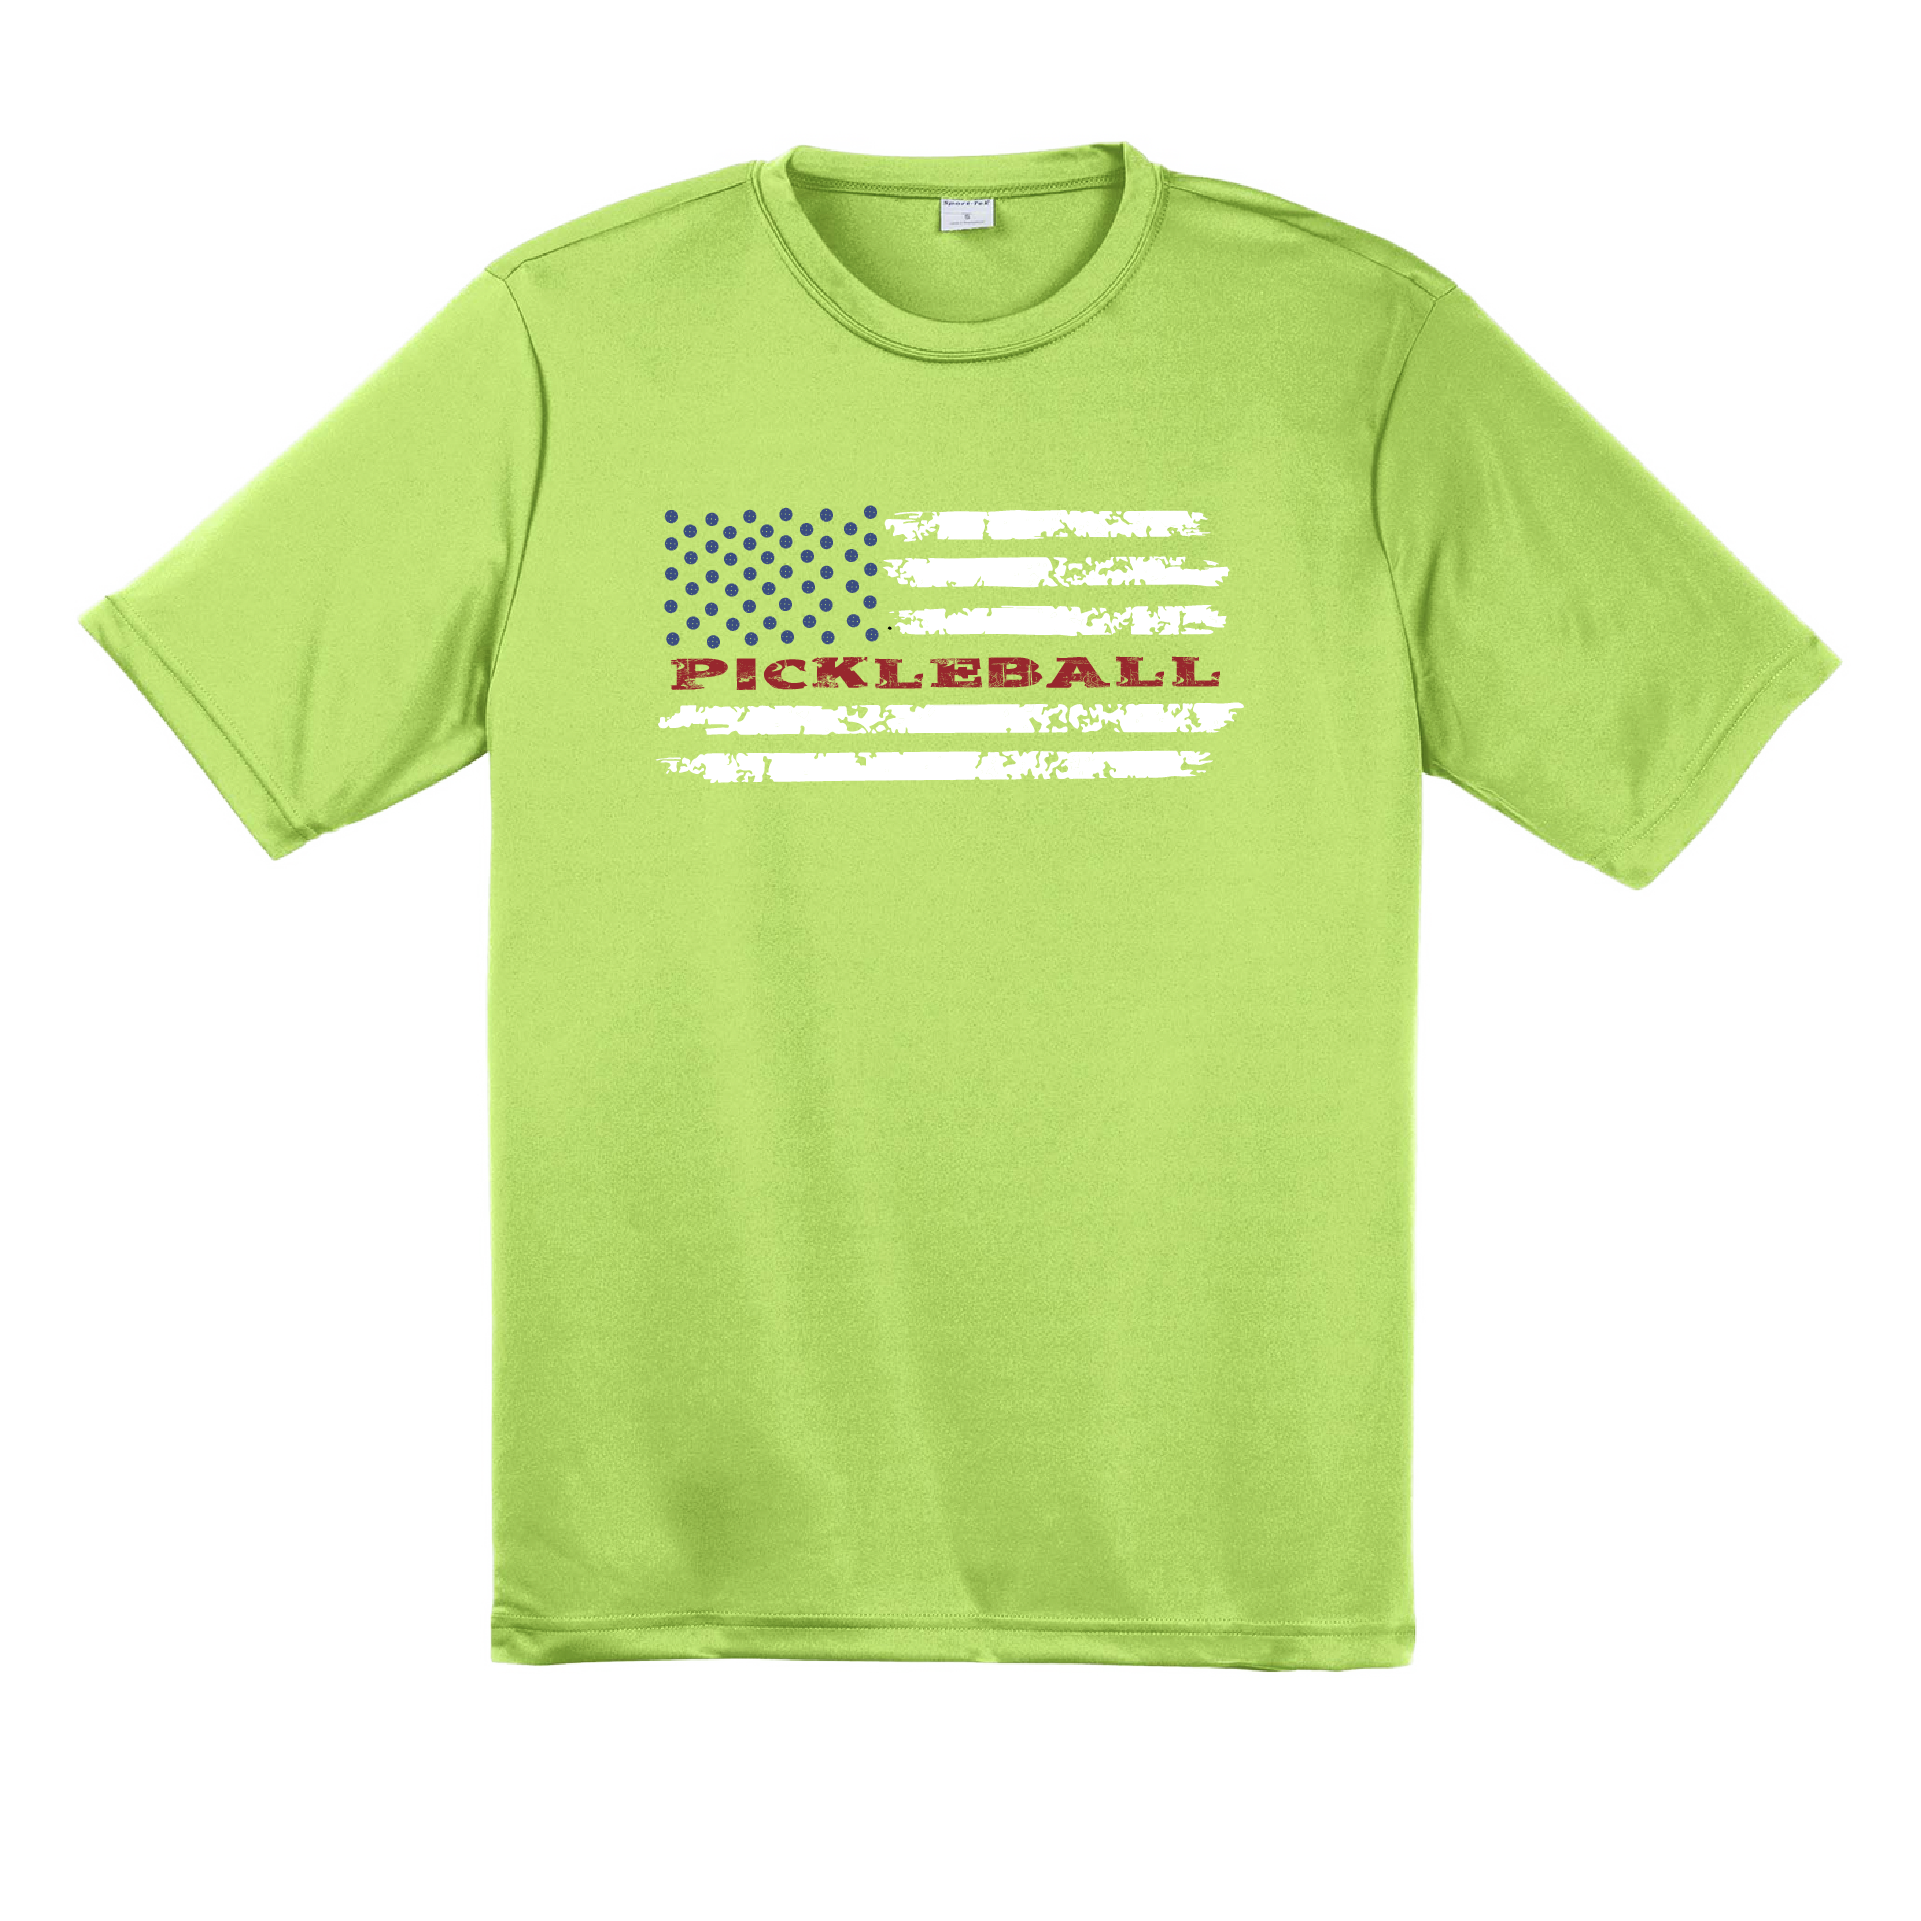 Pickleball Design: Pickleball Horizontal Flag on Front or Back Shirt  Men's Styles: Short-Sleeve  Shirts are lightweight, roomy and highly breathable. These moisture-wicking shirts are designed for athletic performance. They feature PosiCharge technology to lock in color and prevent logos from fading. Removable tag and set-in sleeves for comfort.